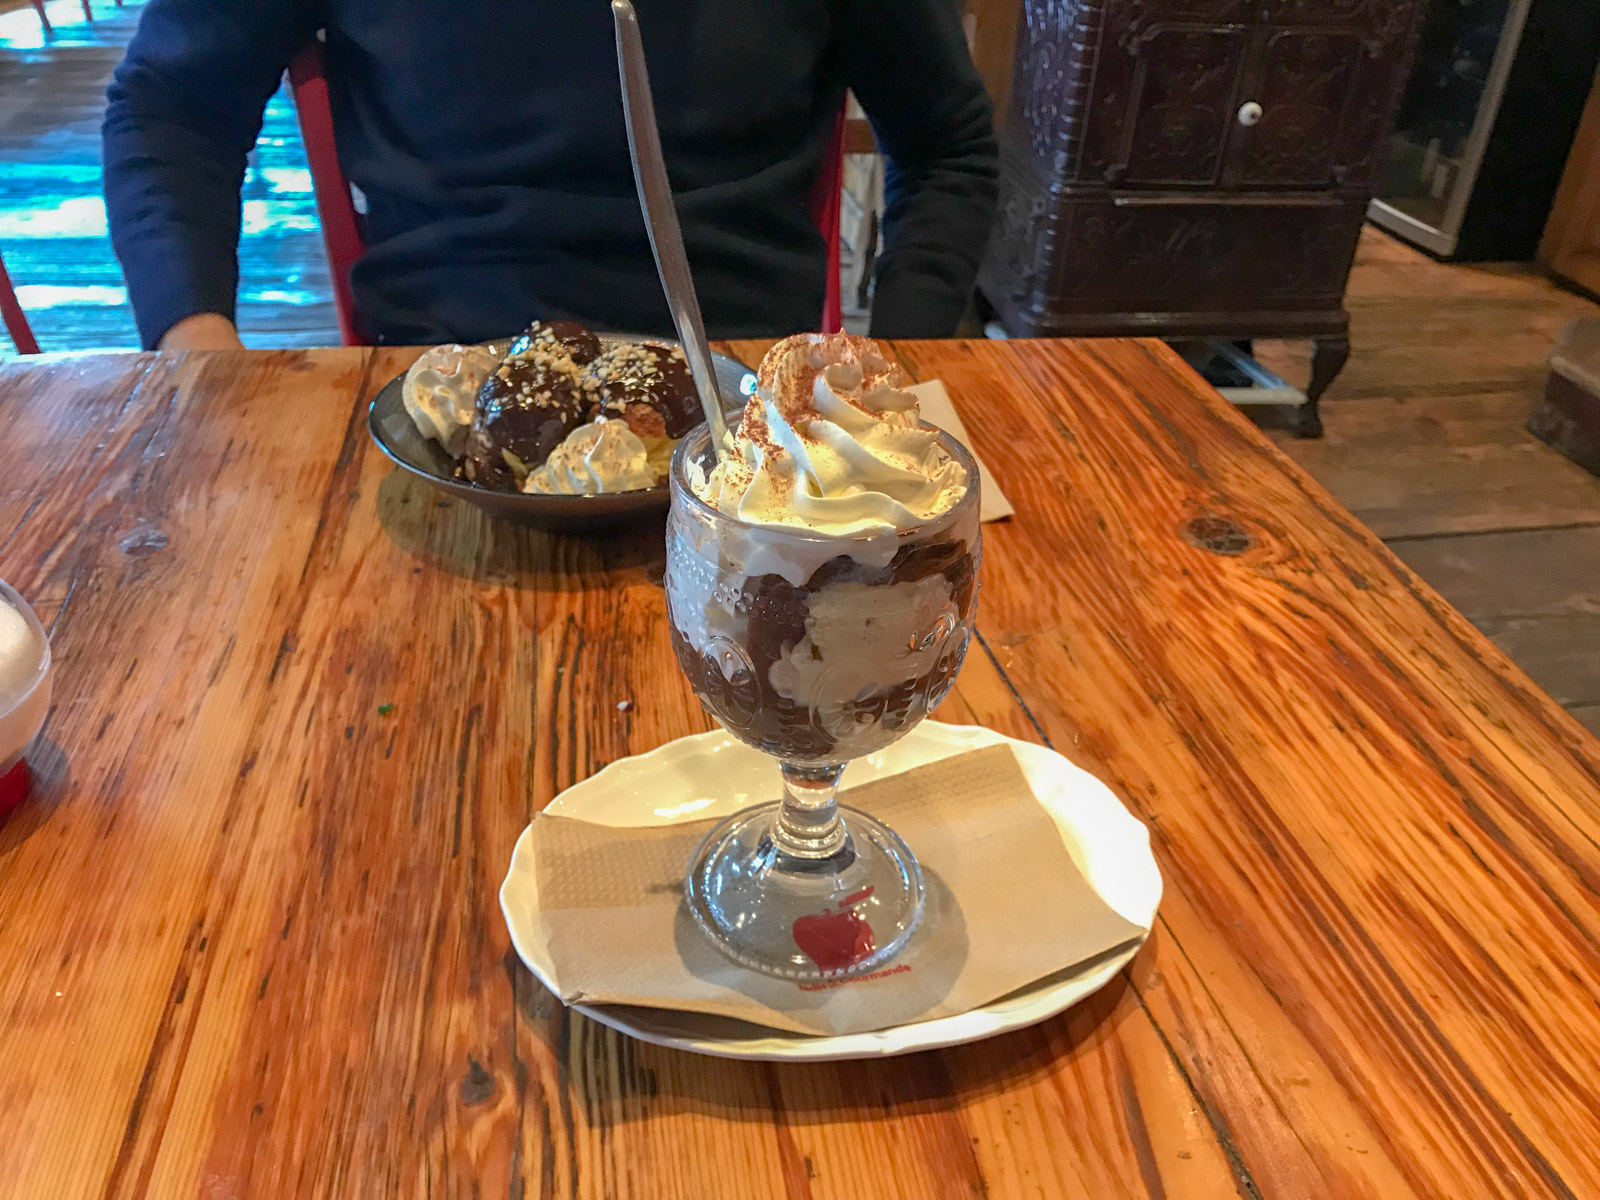 A small glass of chocolate dessert topped with whipped cream